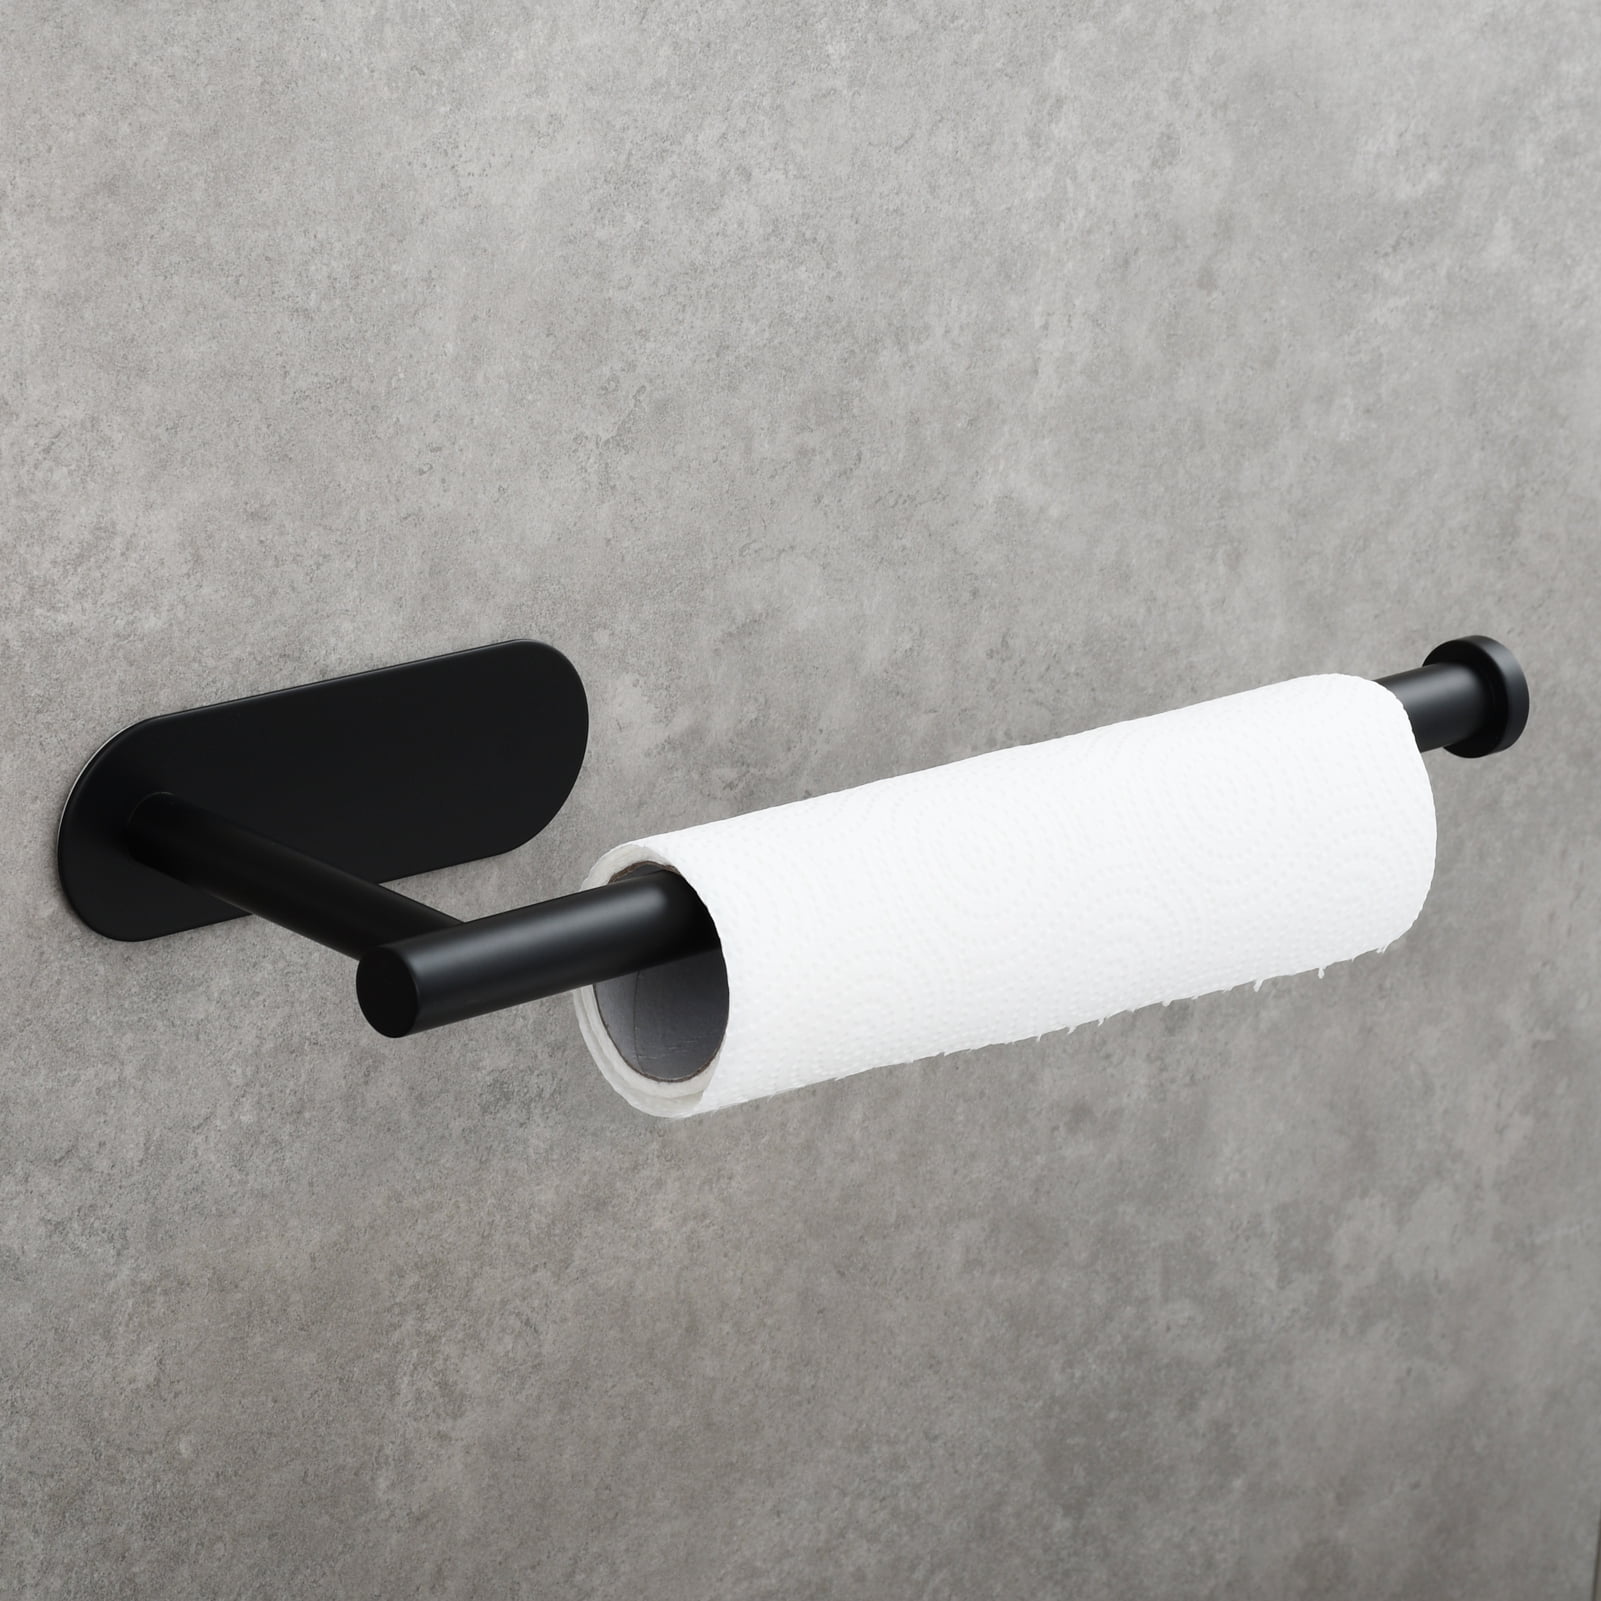 Details about   Portable Toilet Paper Holder Shelf For Toilet Wall Mounted Roll Paper Dispenser 